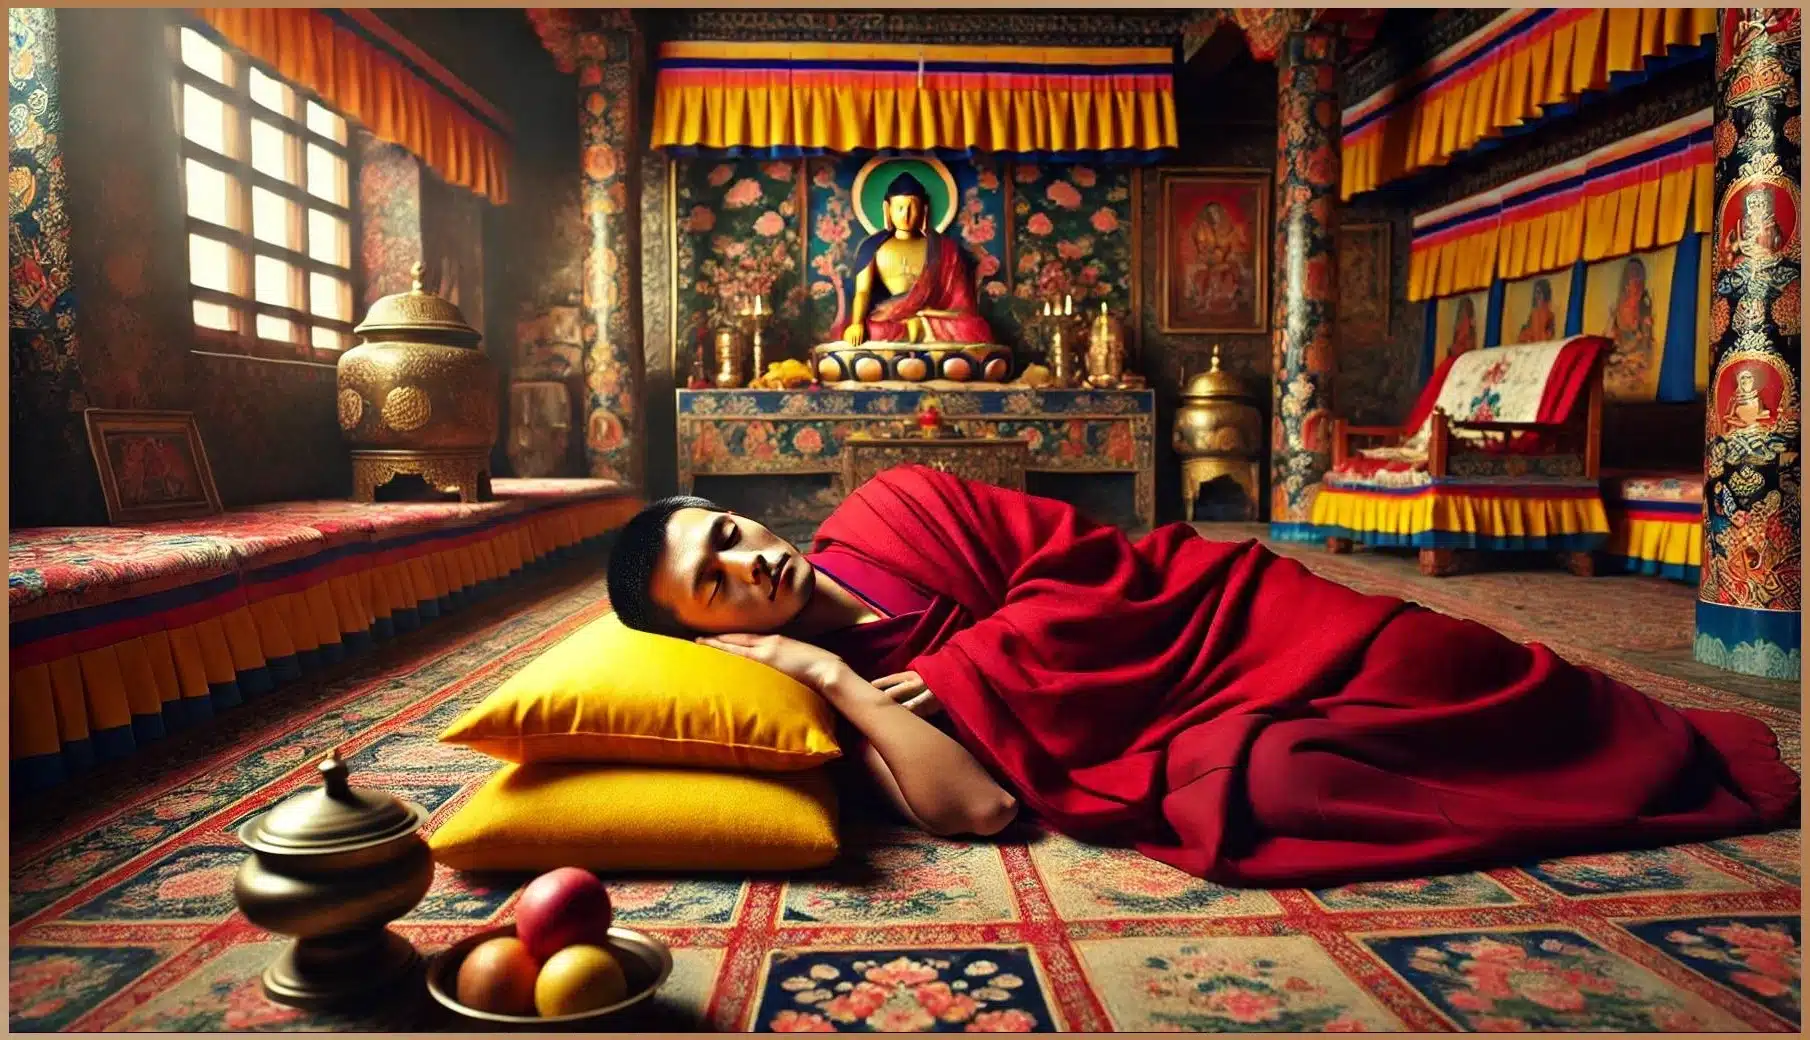 Tibetan Buddhist monk practicing Dream Yoga, lying on a cushion in a richly decorated temple room.